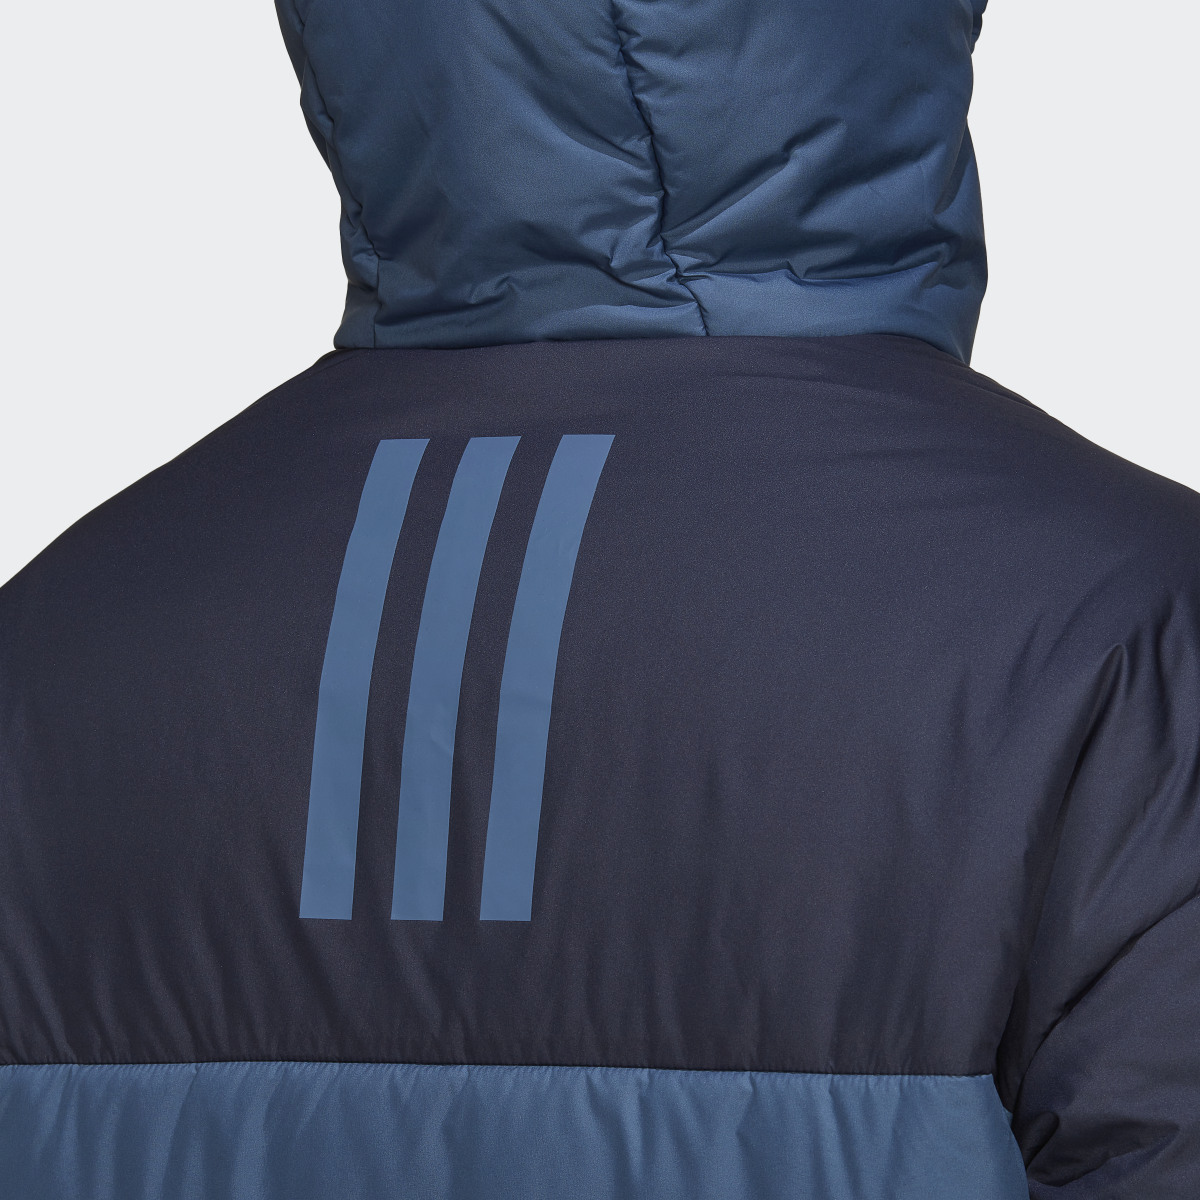 Adidas BSC 3-Stripes Puffy Hooded Jacket. 9